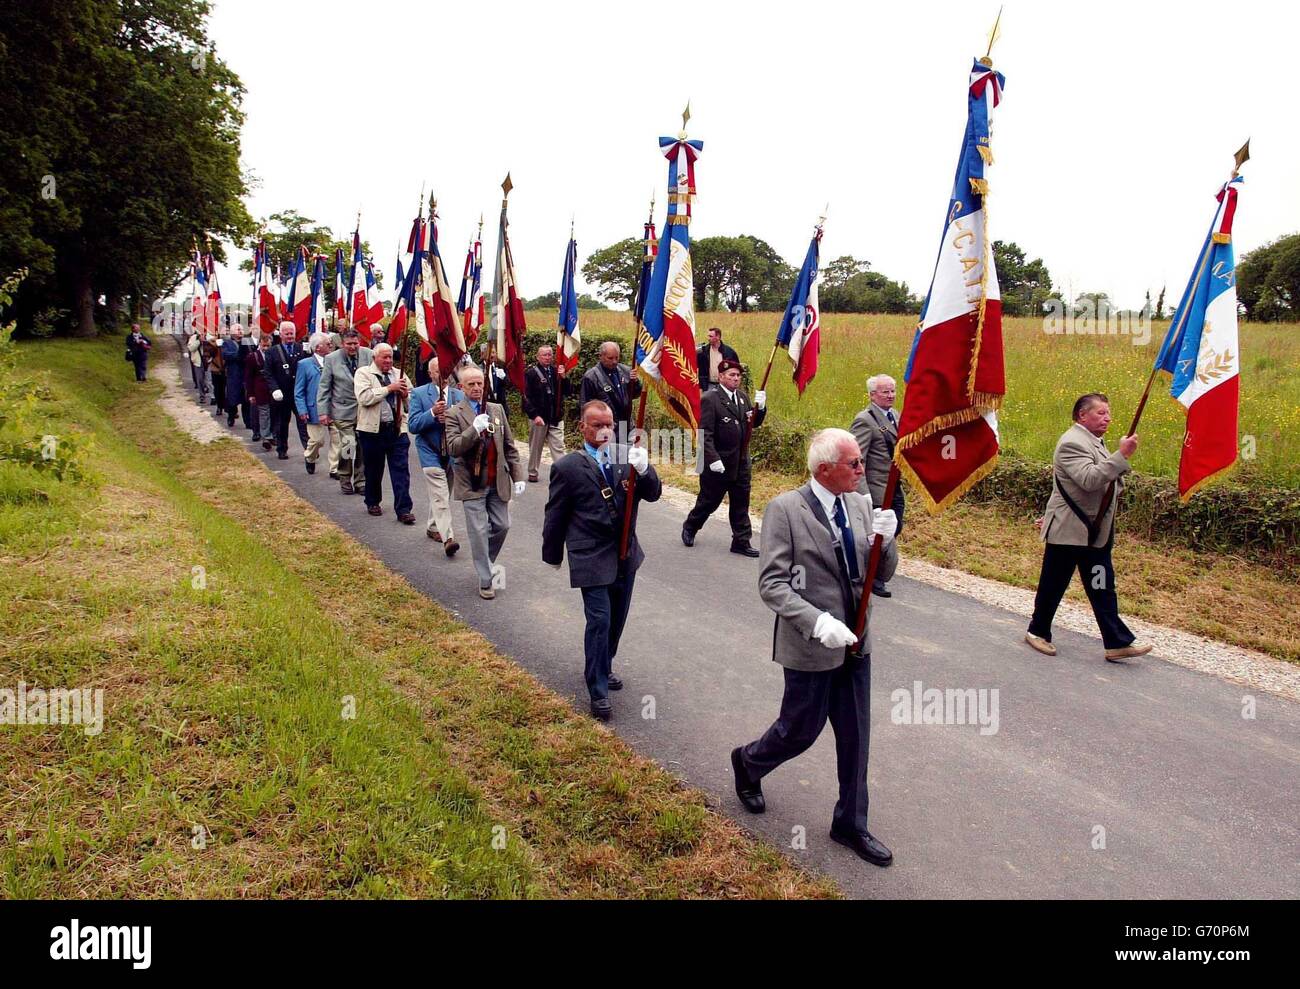 The villagers of Magneville in Normandy march to a memorial in their village to soldiers of the American 101st Airborne Division who were shot down on D-Day in 1944. This weekend see events to mark the 60th anniversary of the allied invasion of Europe. Stock Photo